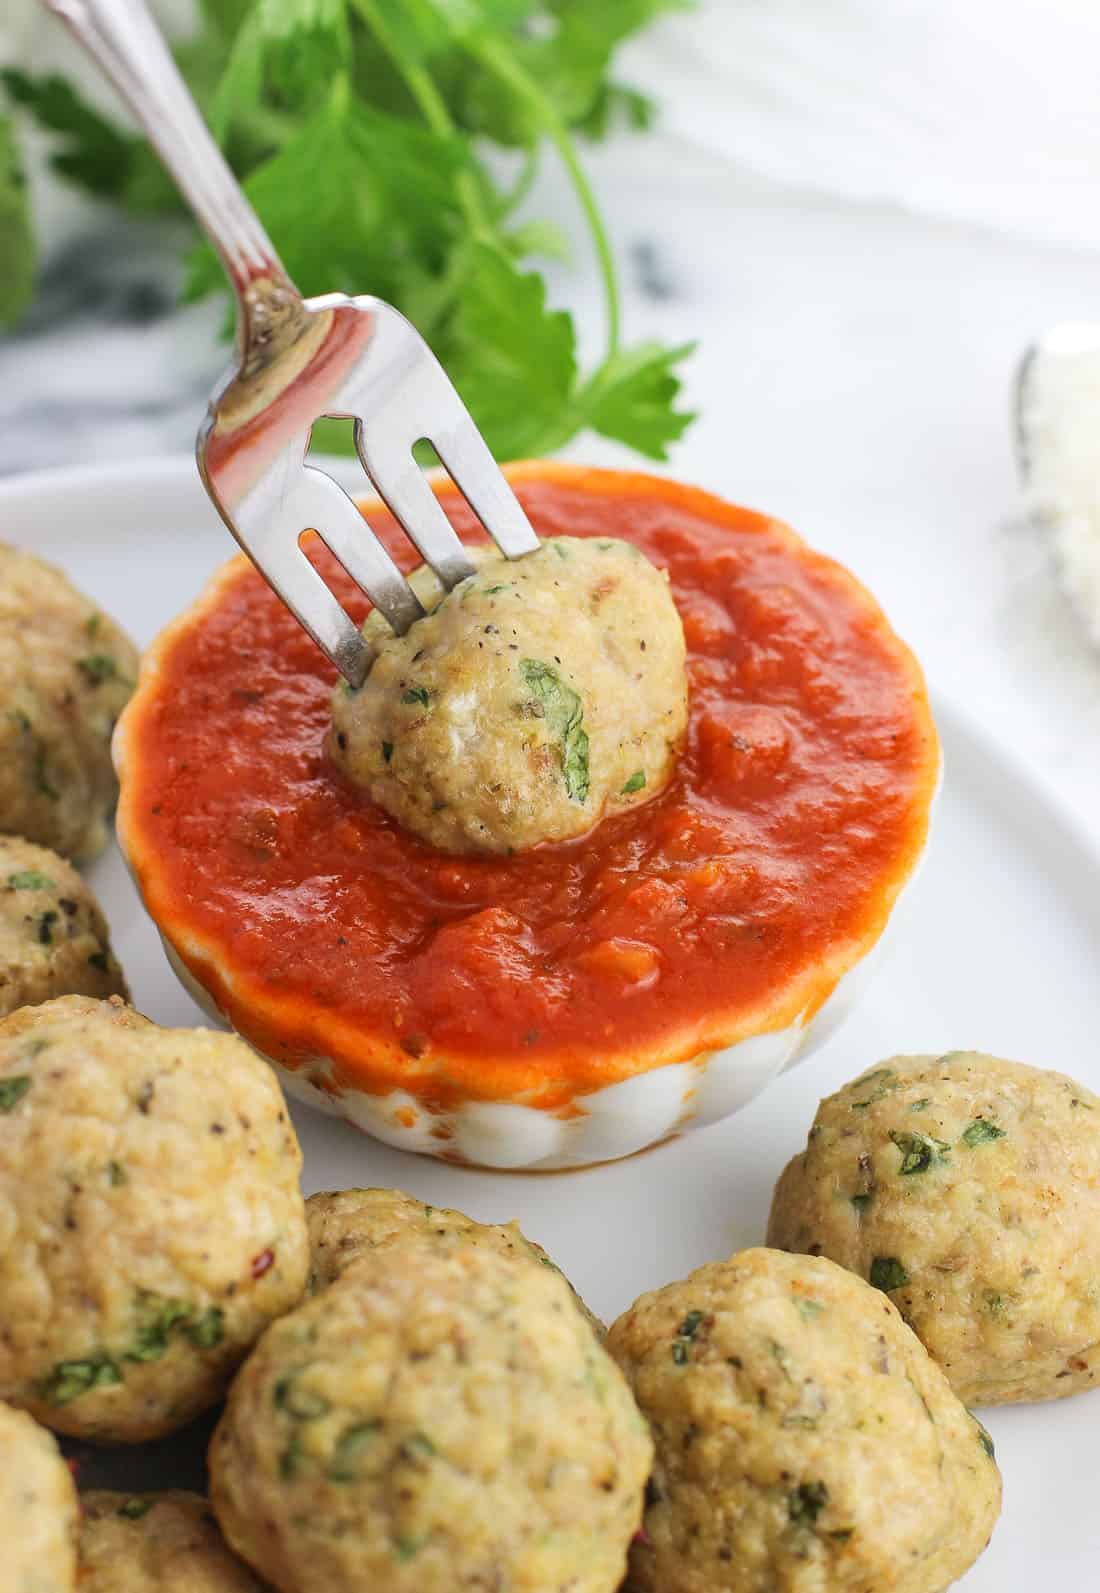 A fork dipping a meatball into the bowl of marinara sauce.